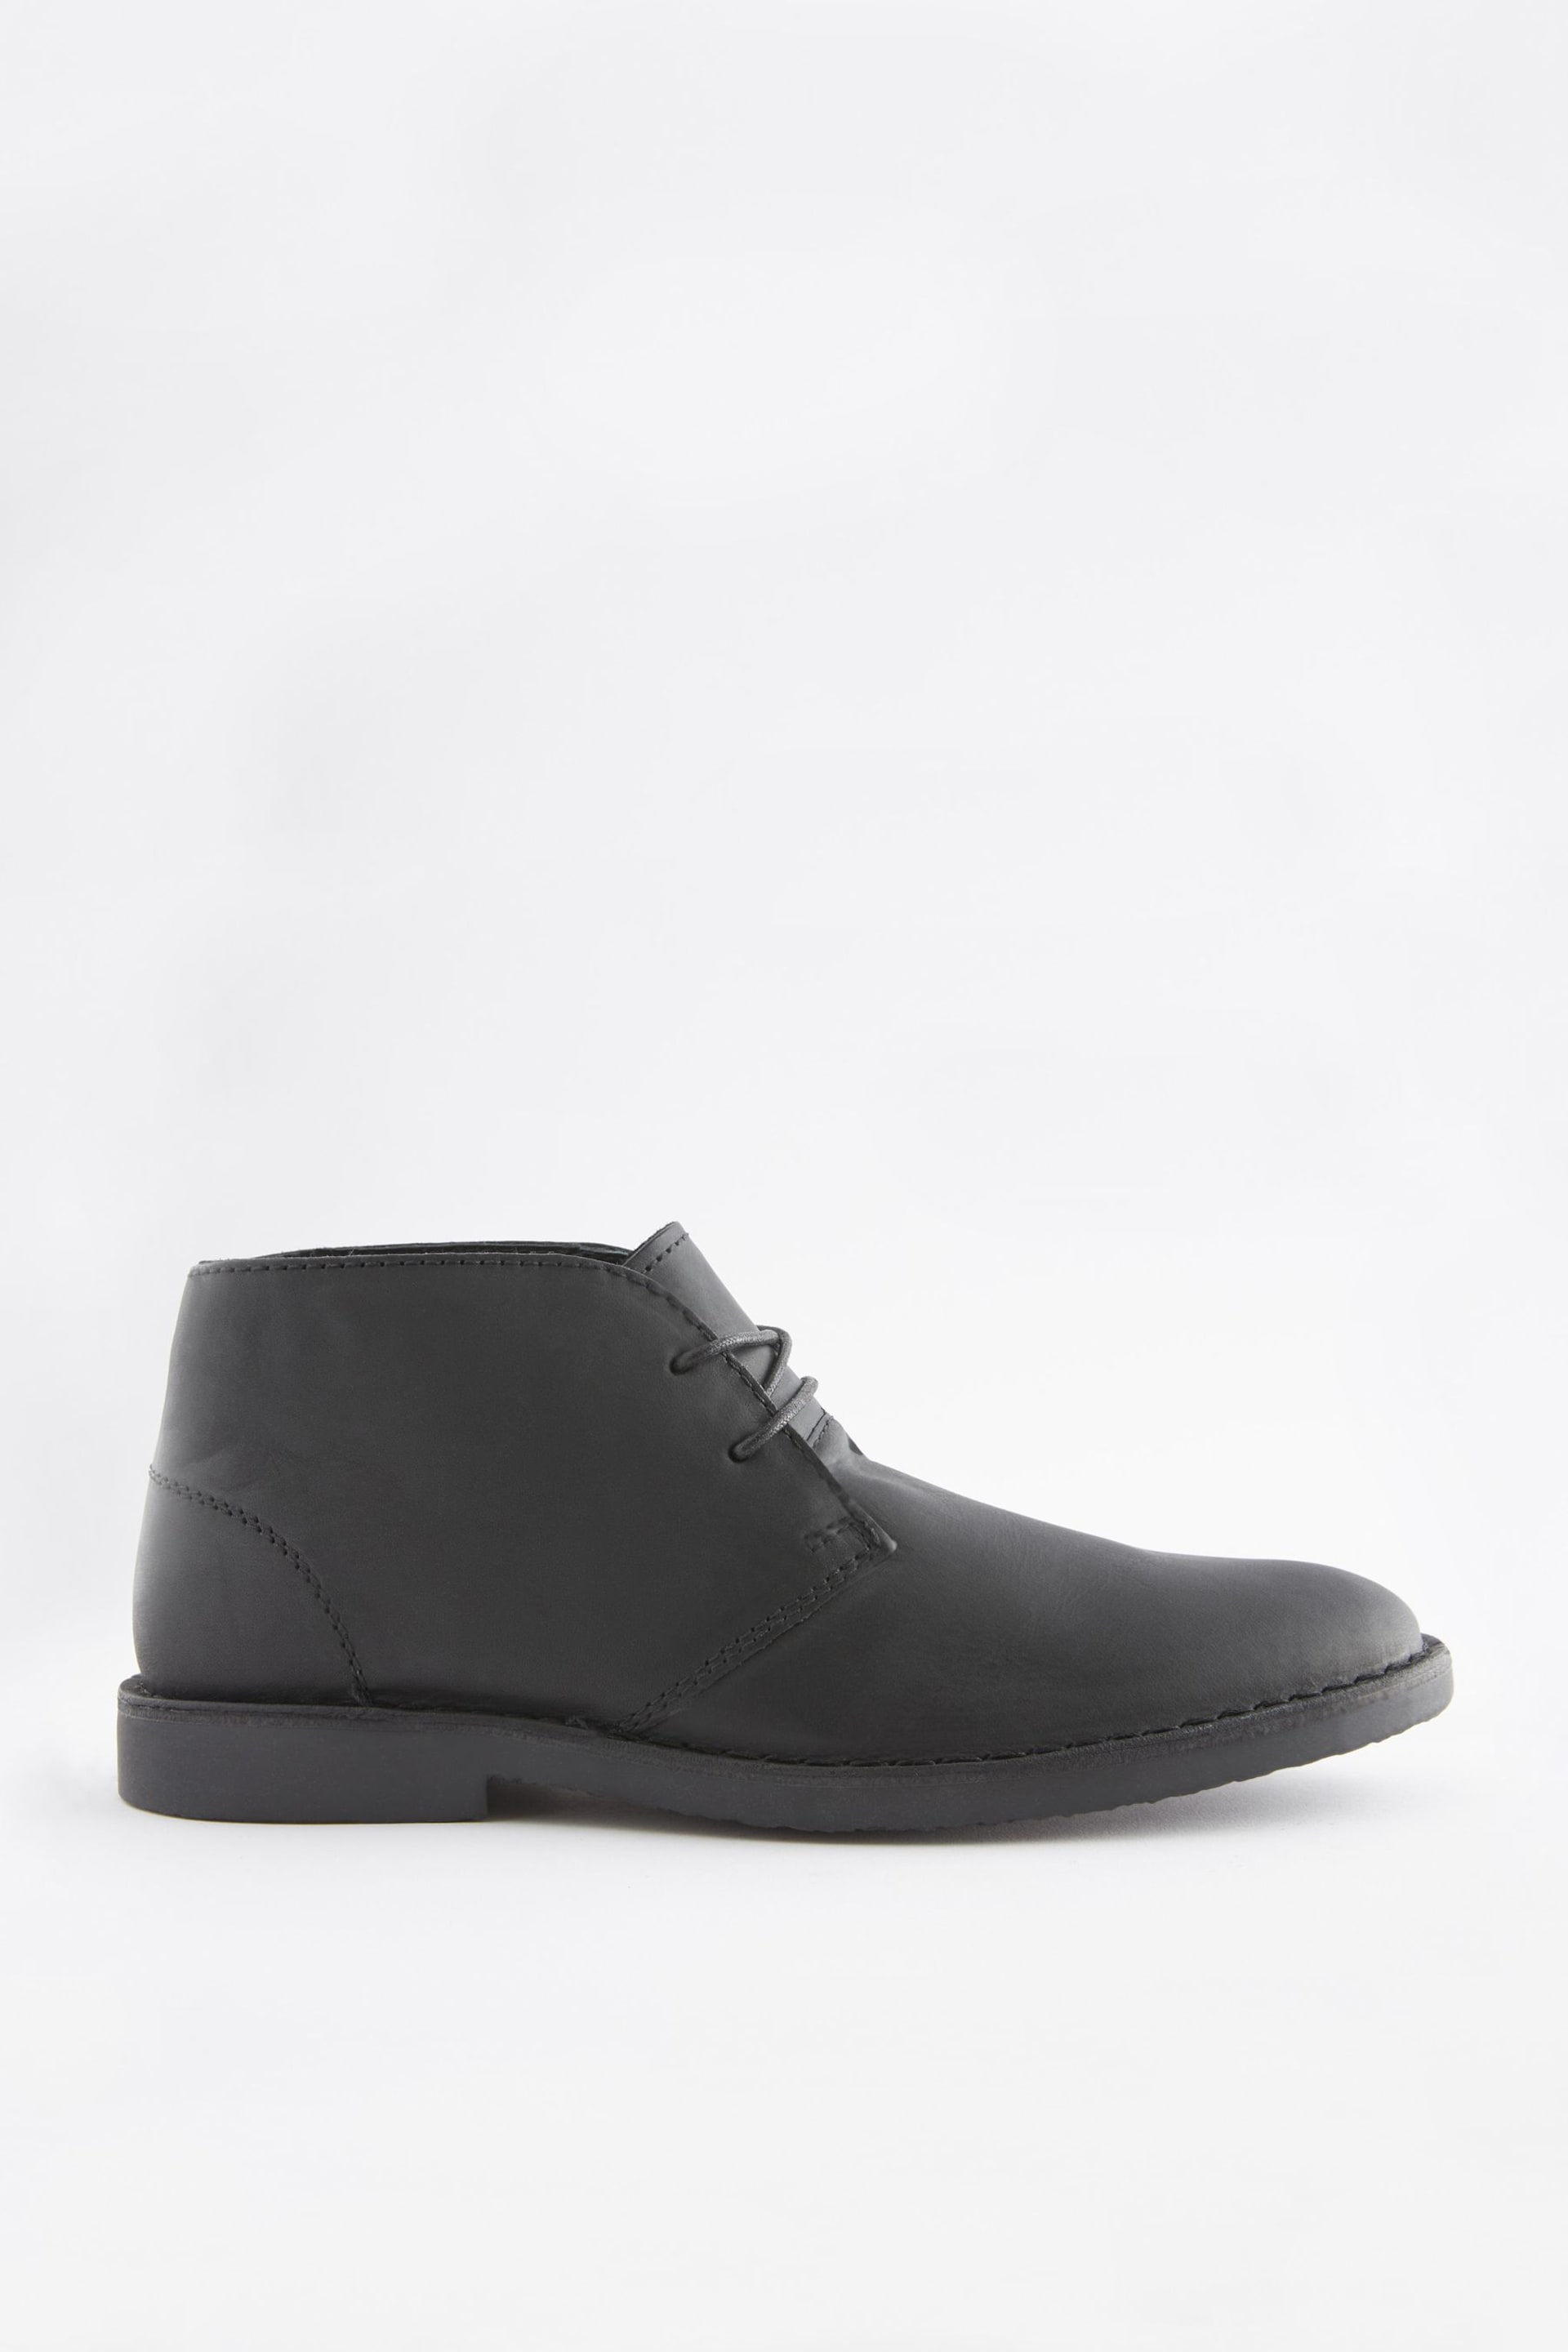 Black Leather Desert Boots - Image 3 of 6